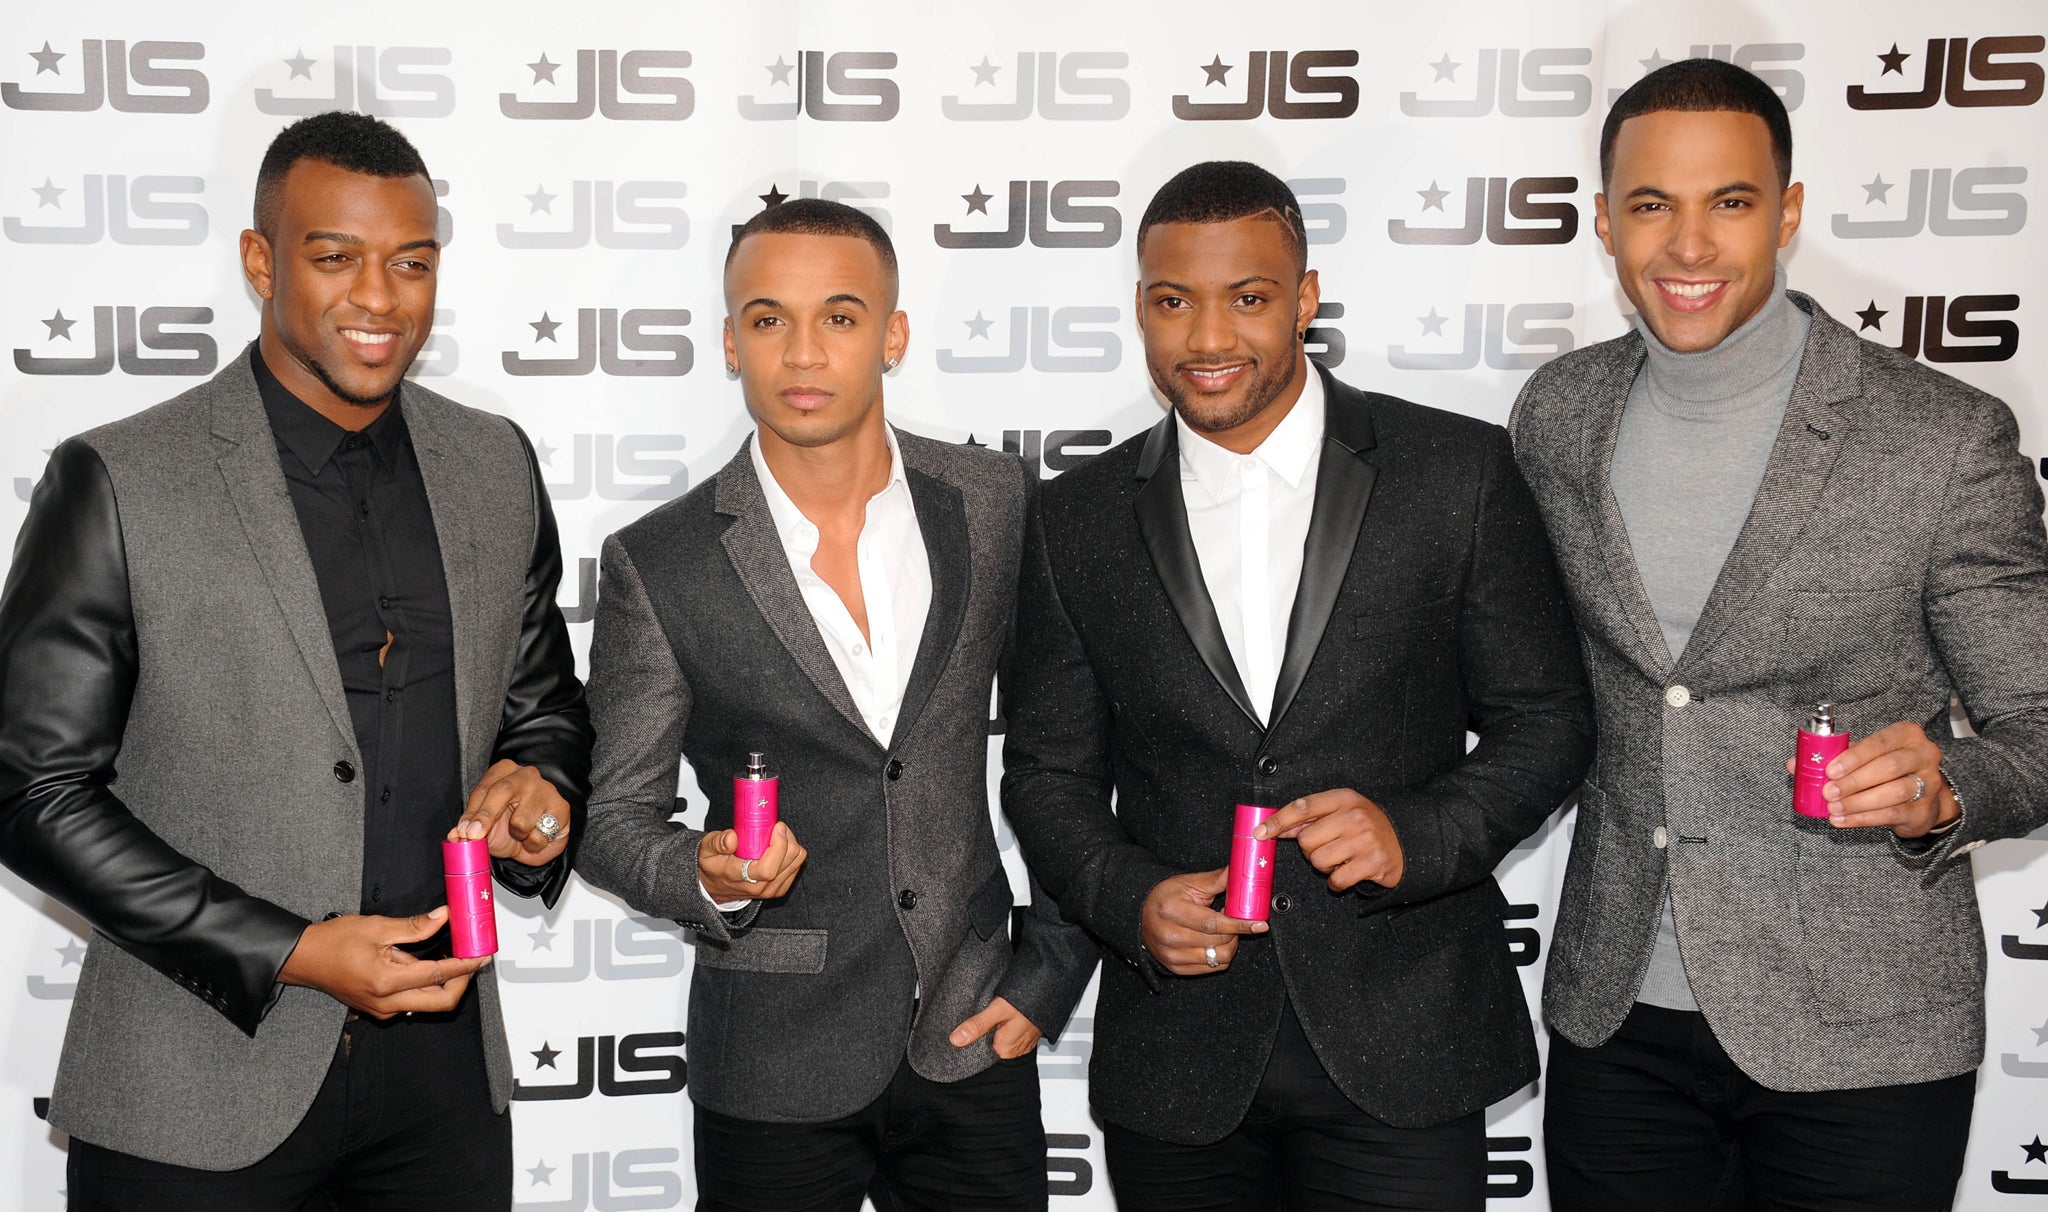 Oritse Williams, Aston Merrygold, JB Gill and Marvin Humes of JLS attends a photocall to launch the new JLS female fragrance 'LOVE' at One Mayfair on January 31, 2013 in London